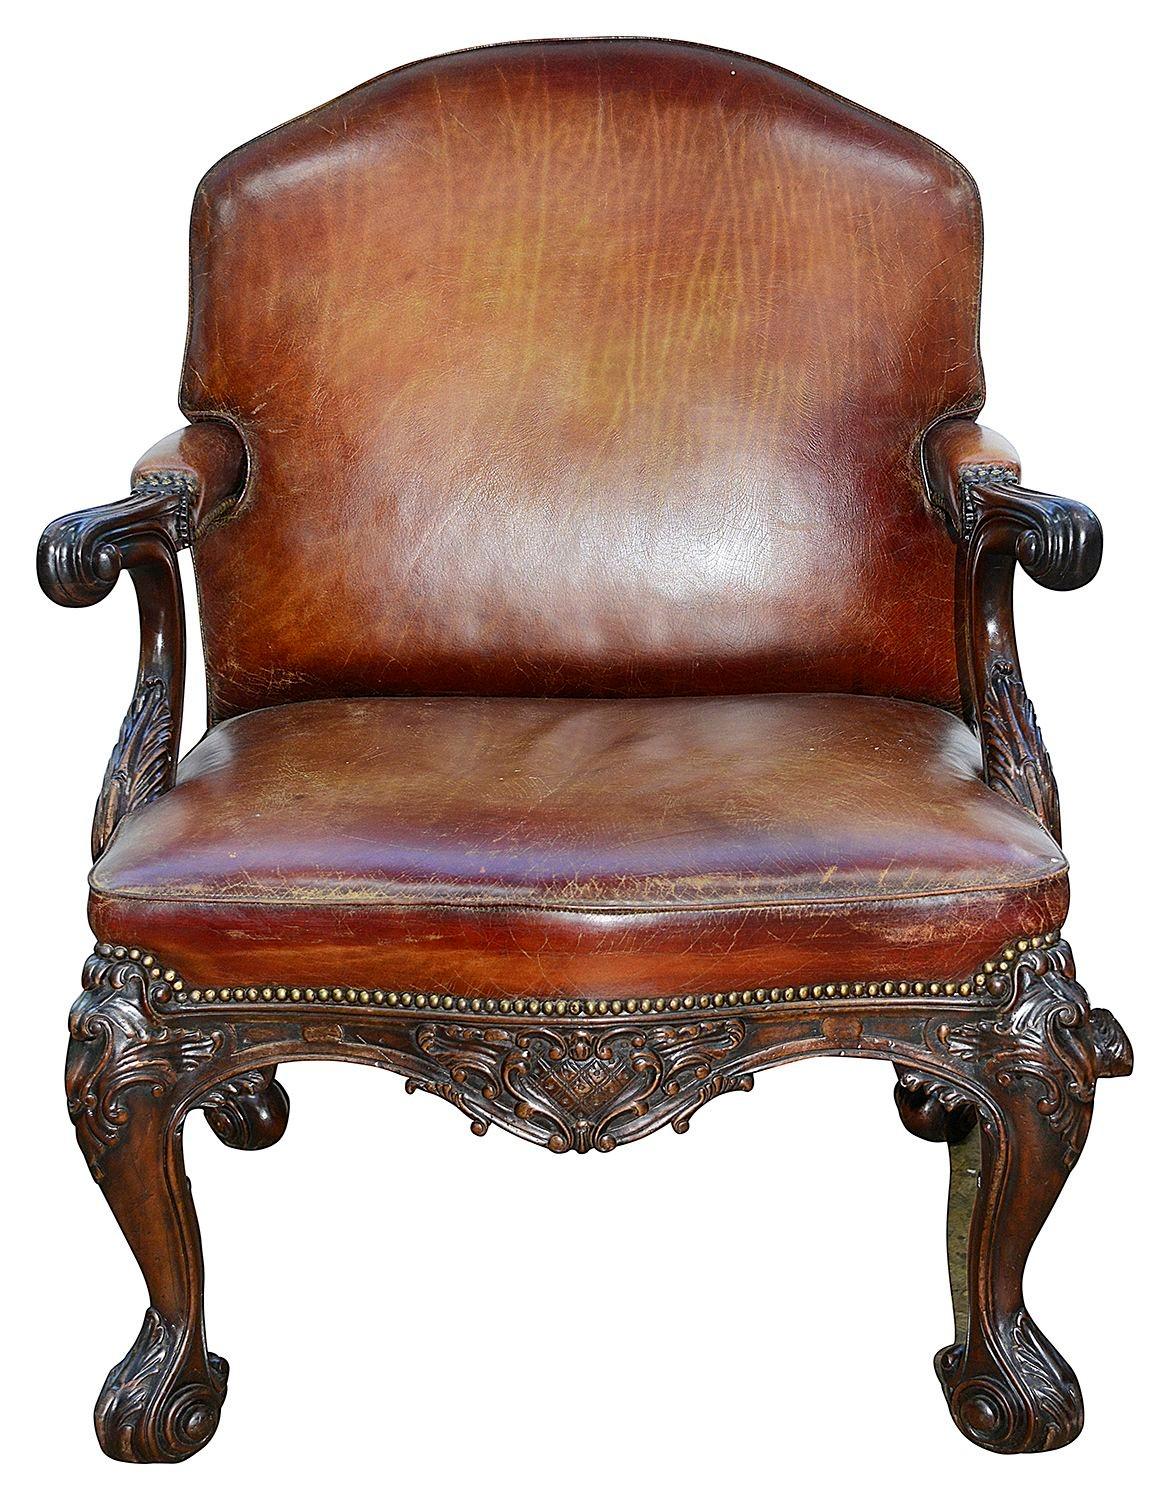 A very hansome 18th century style Mahogany leather upholstered arm chair, having a wonderful faded colour tan colour to the hide, brass studded. Classical hand carved scrolling amd foliate decoration to the show wood, raised on four generous